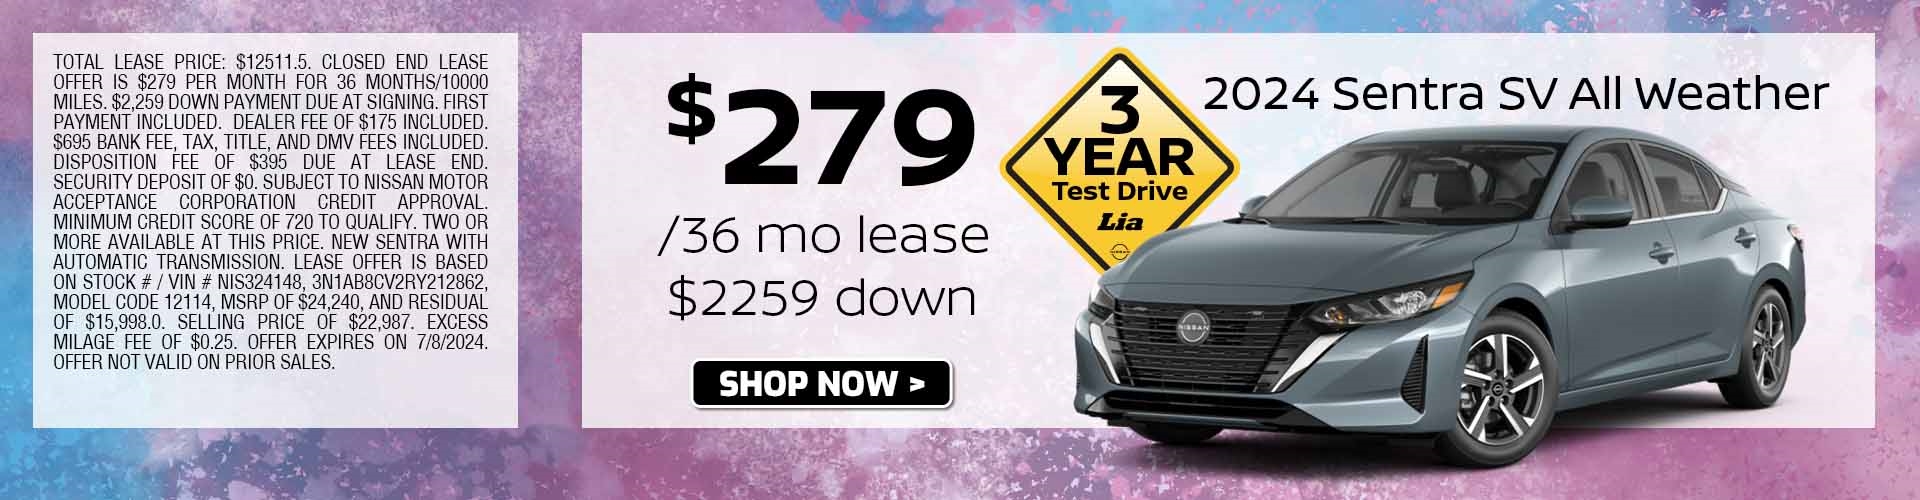 sentra lease special